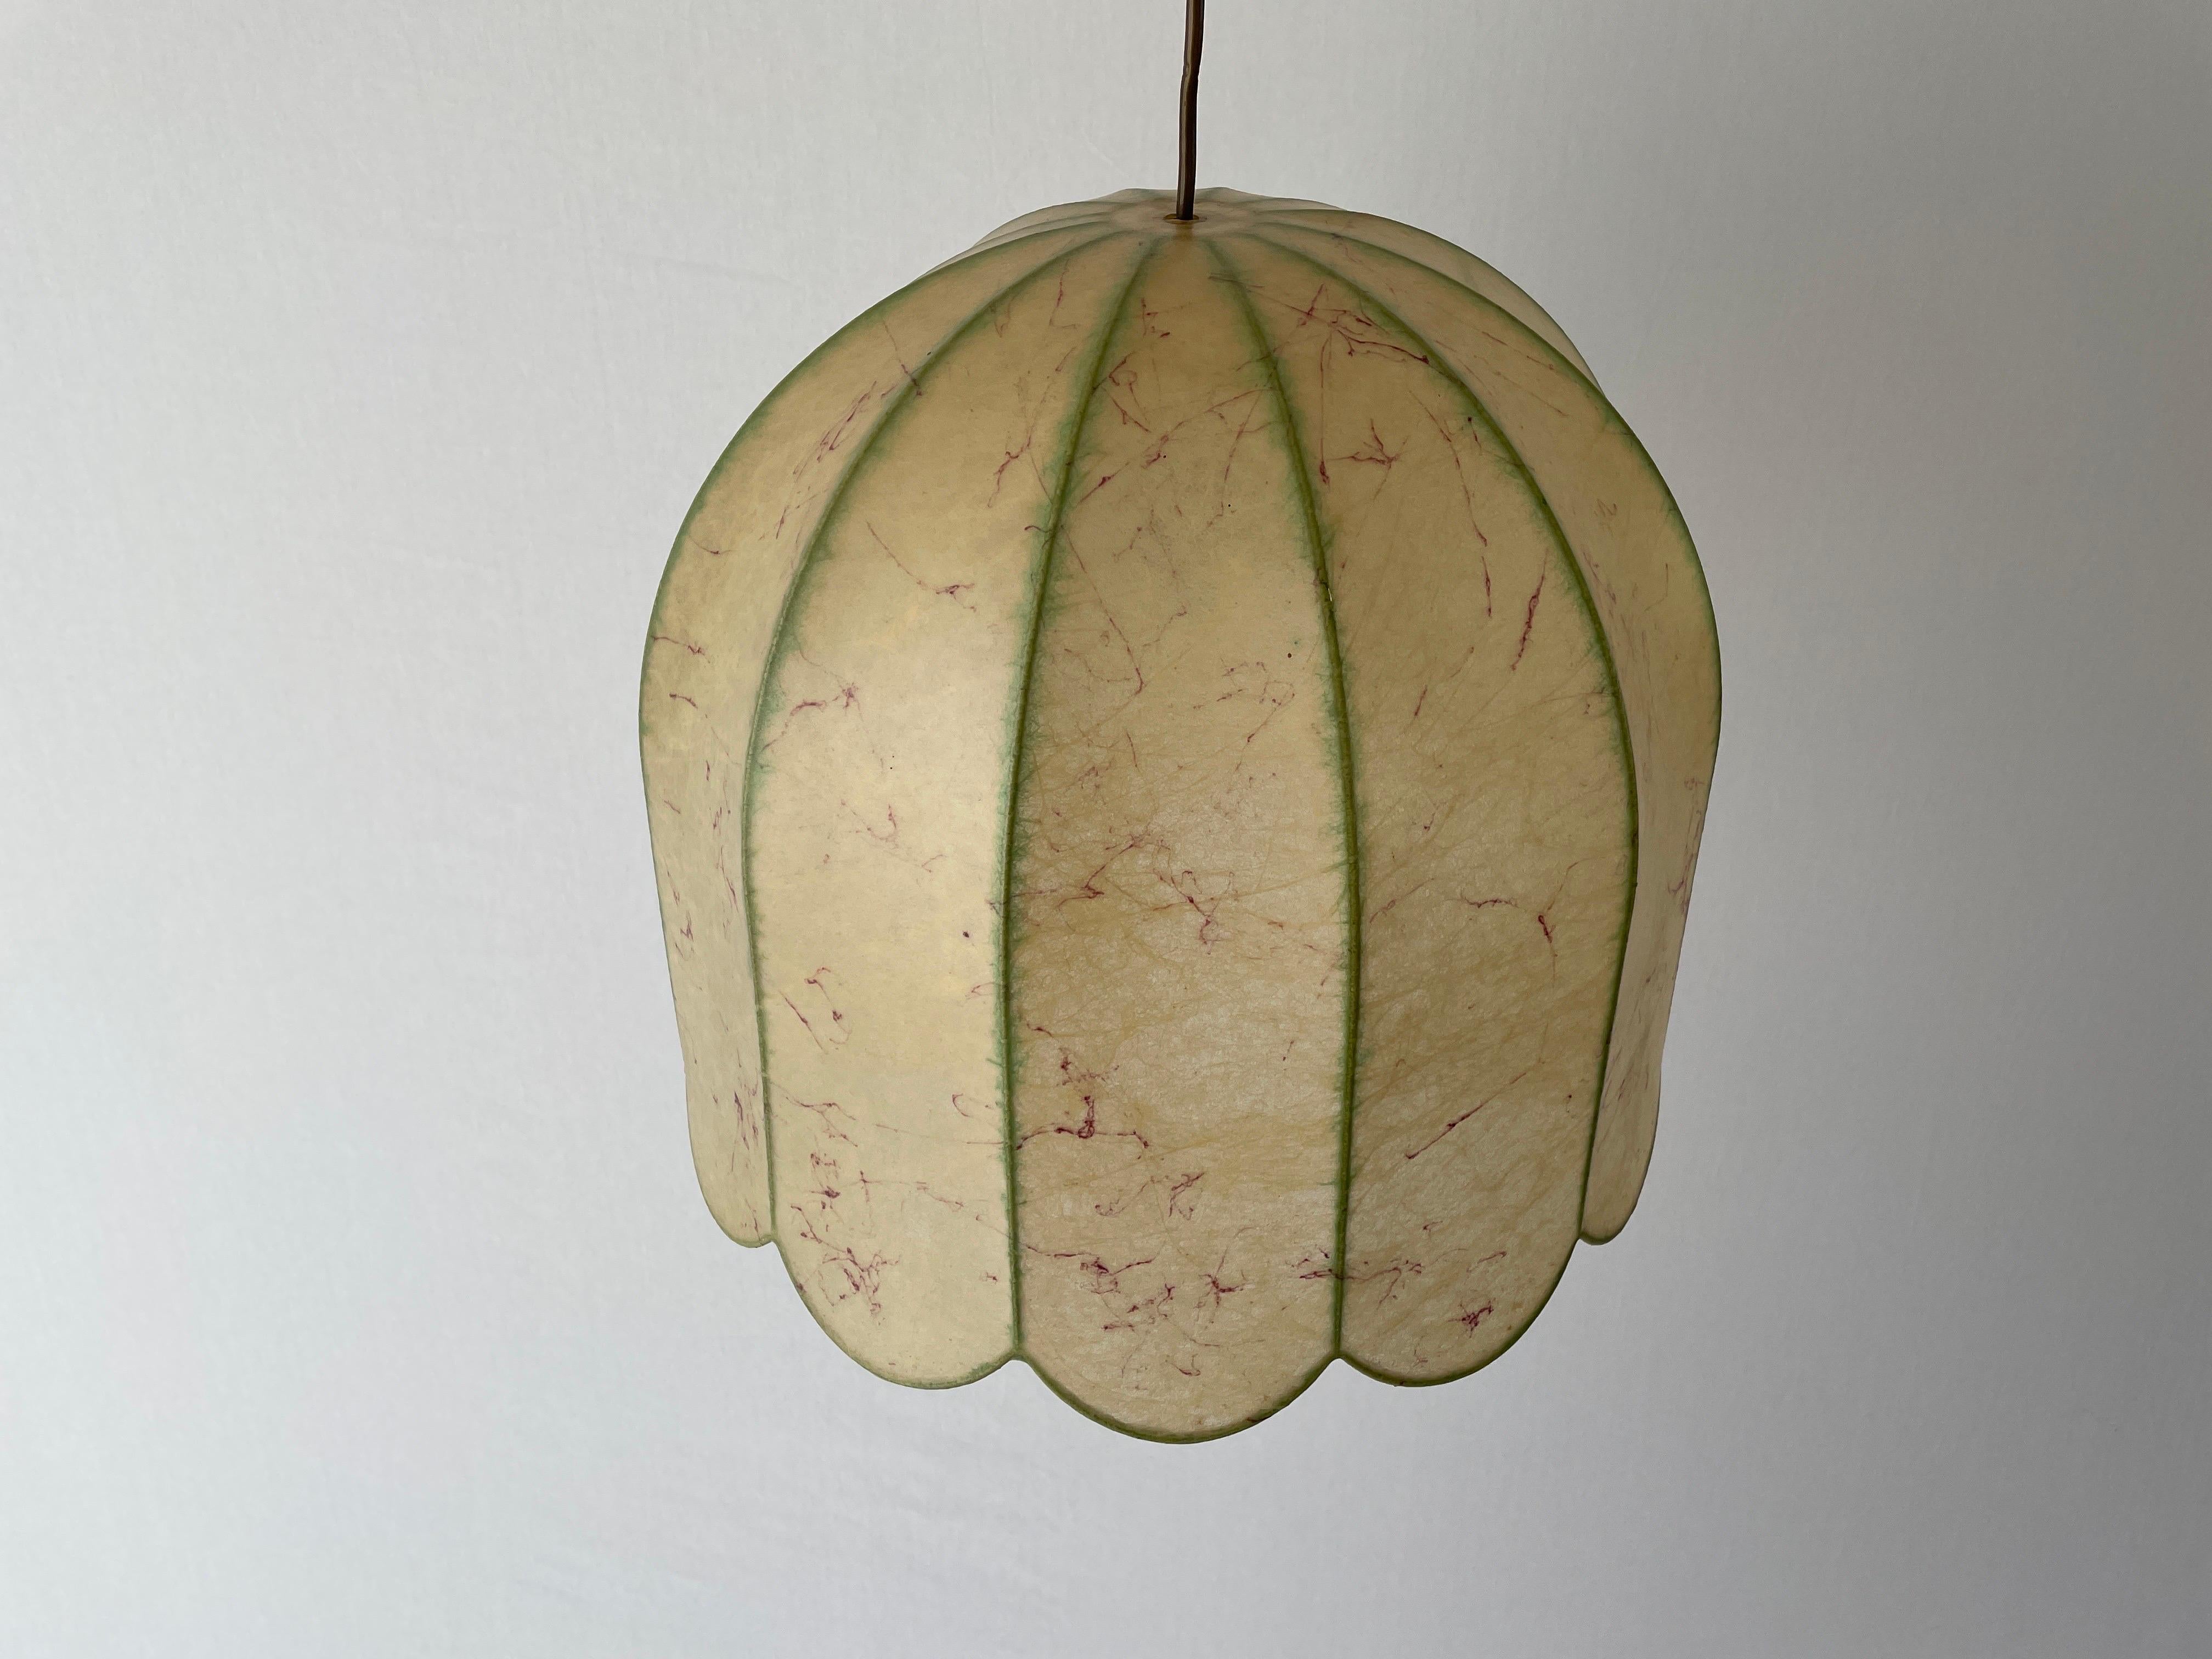 Flower Design Cocoon Pendant Lamp by Goldkant, 1960s, Germany

Lampshade is in very good vintage condition.

This lamp works with E27 light bulbs. 
Wired and suitable to use with 220V and 110V for all countries.

Measurements:
Total Height: 85